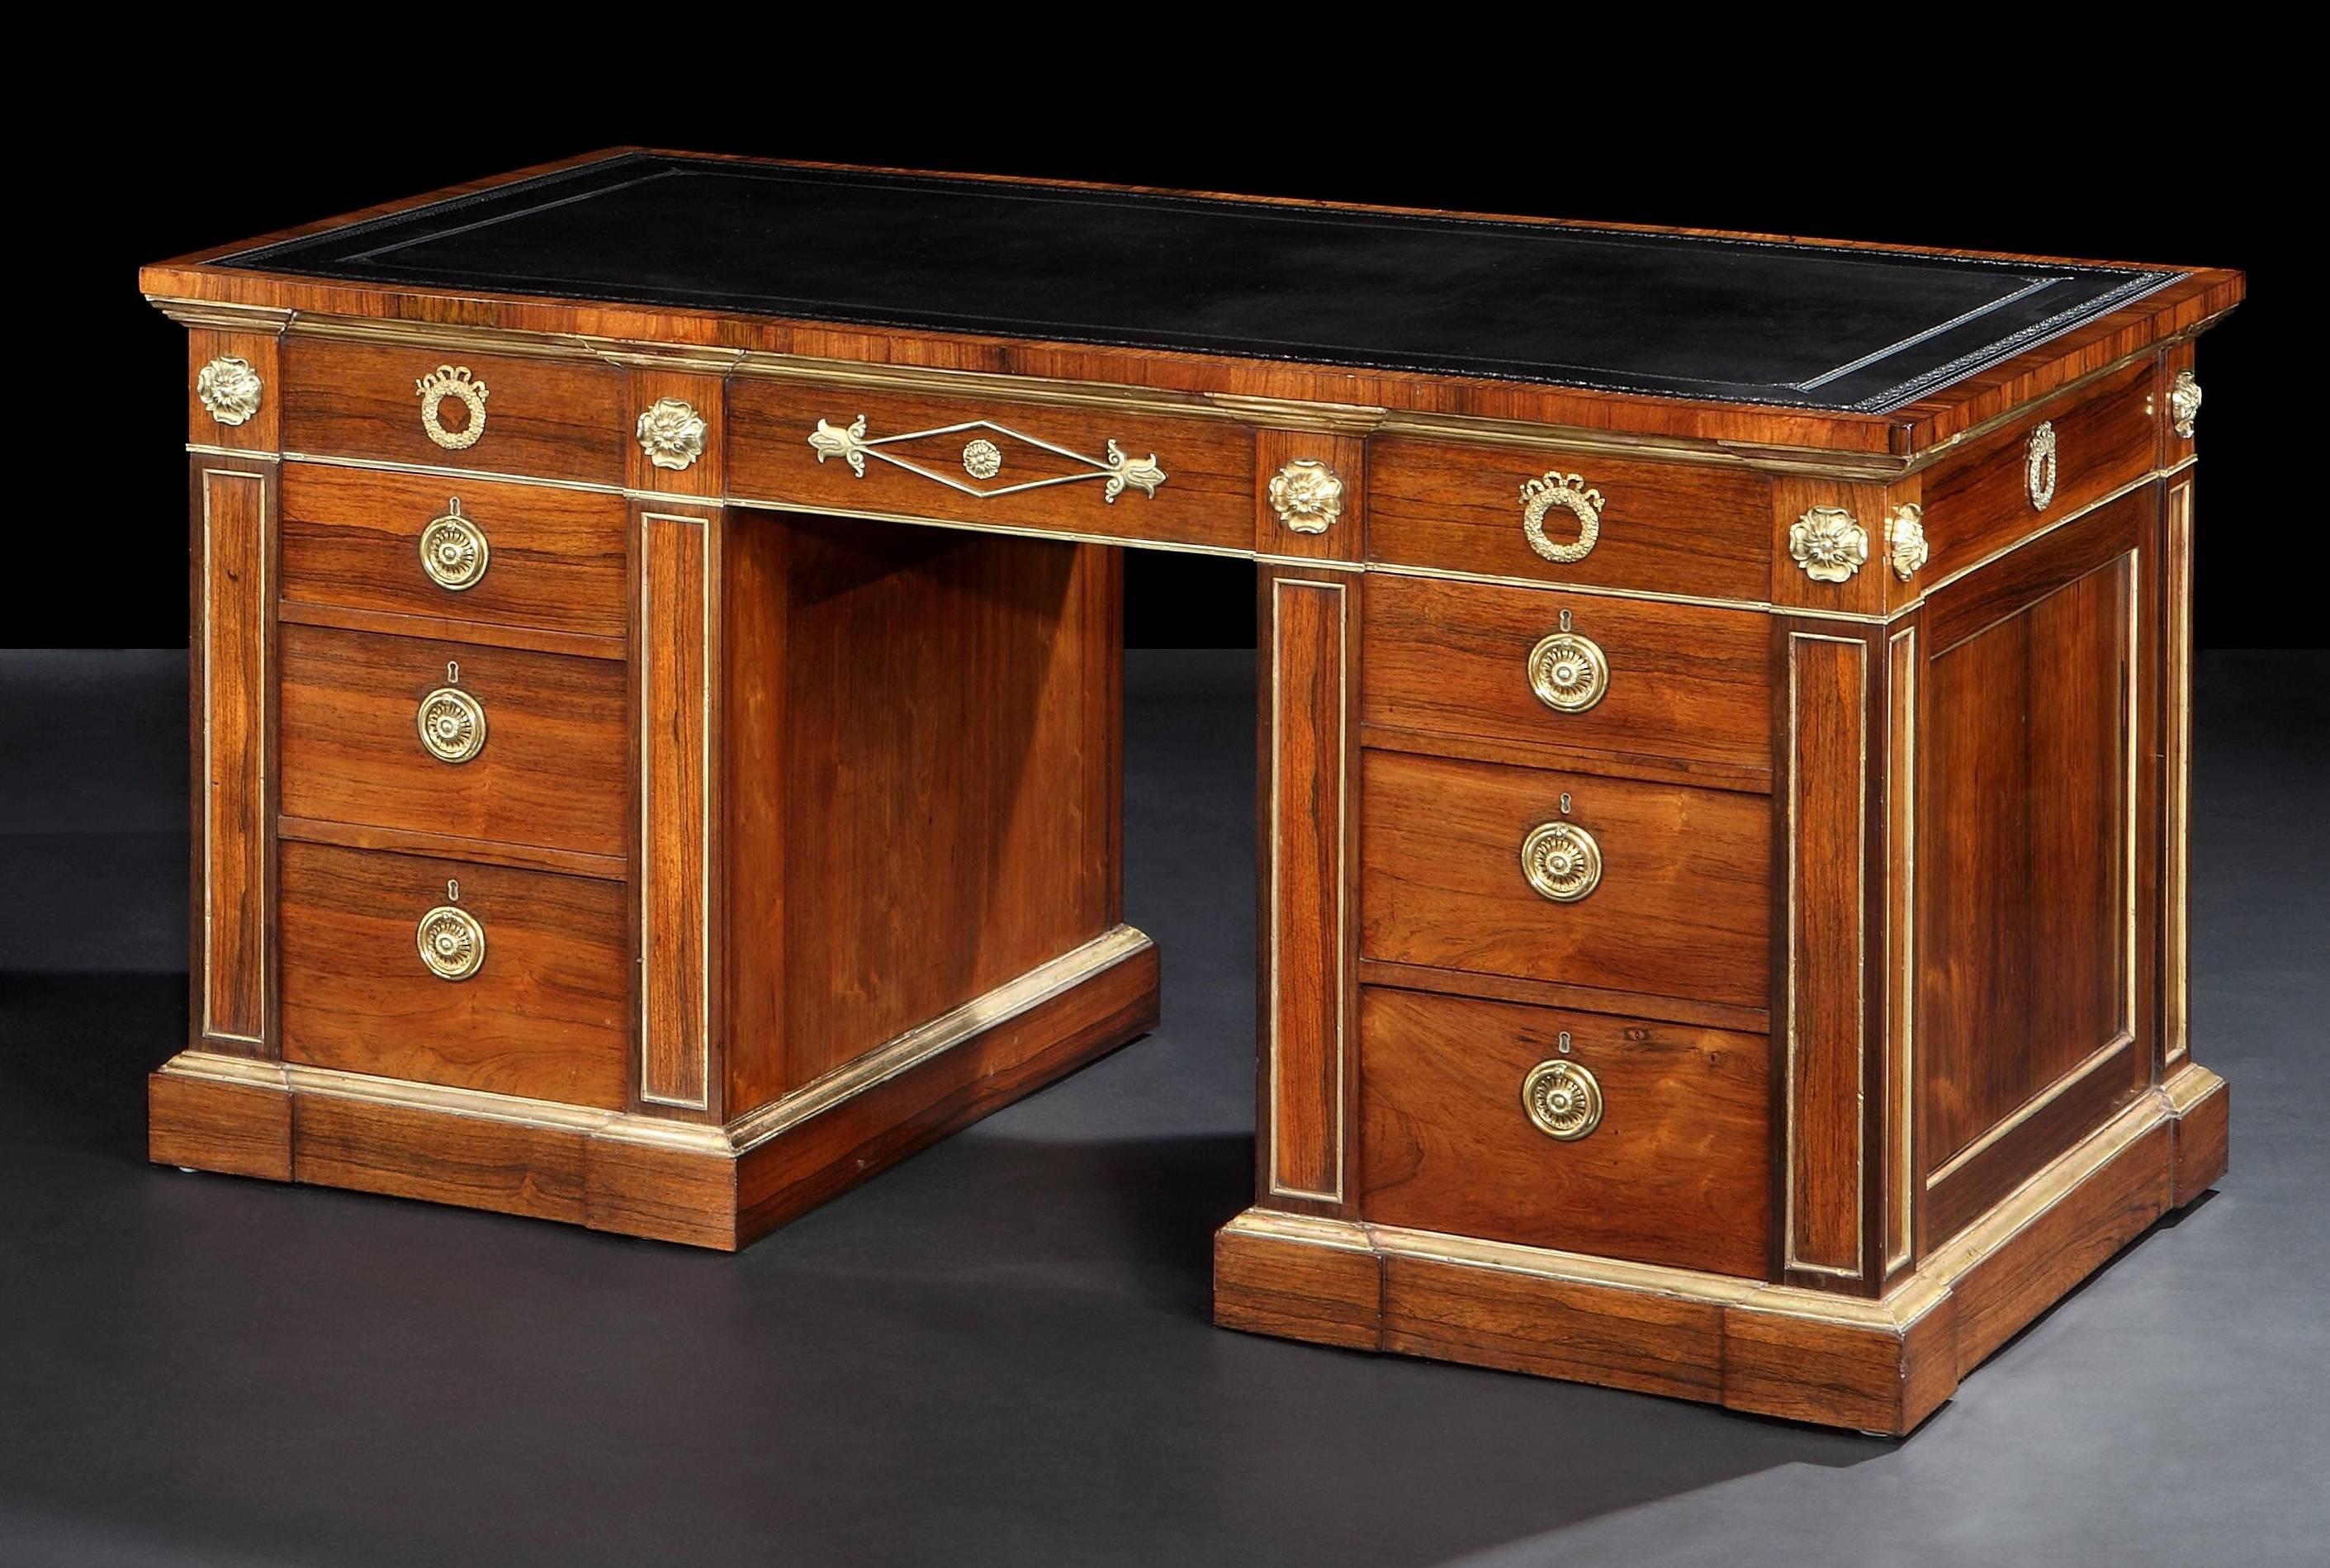 Fine Pair of Antique Pedestal Desks in the Regency Manner

Constructed in goncalo alves, with gilt bronze mounts and giltwood highlights, of freestanding form, with very gentle inverted breakfront plinths, each pedestal housing three cedar lined